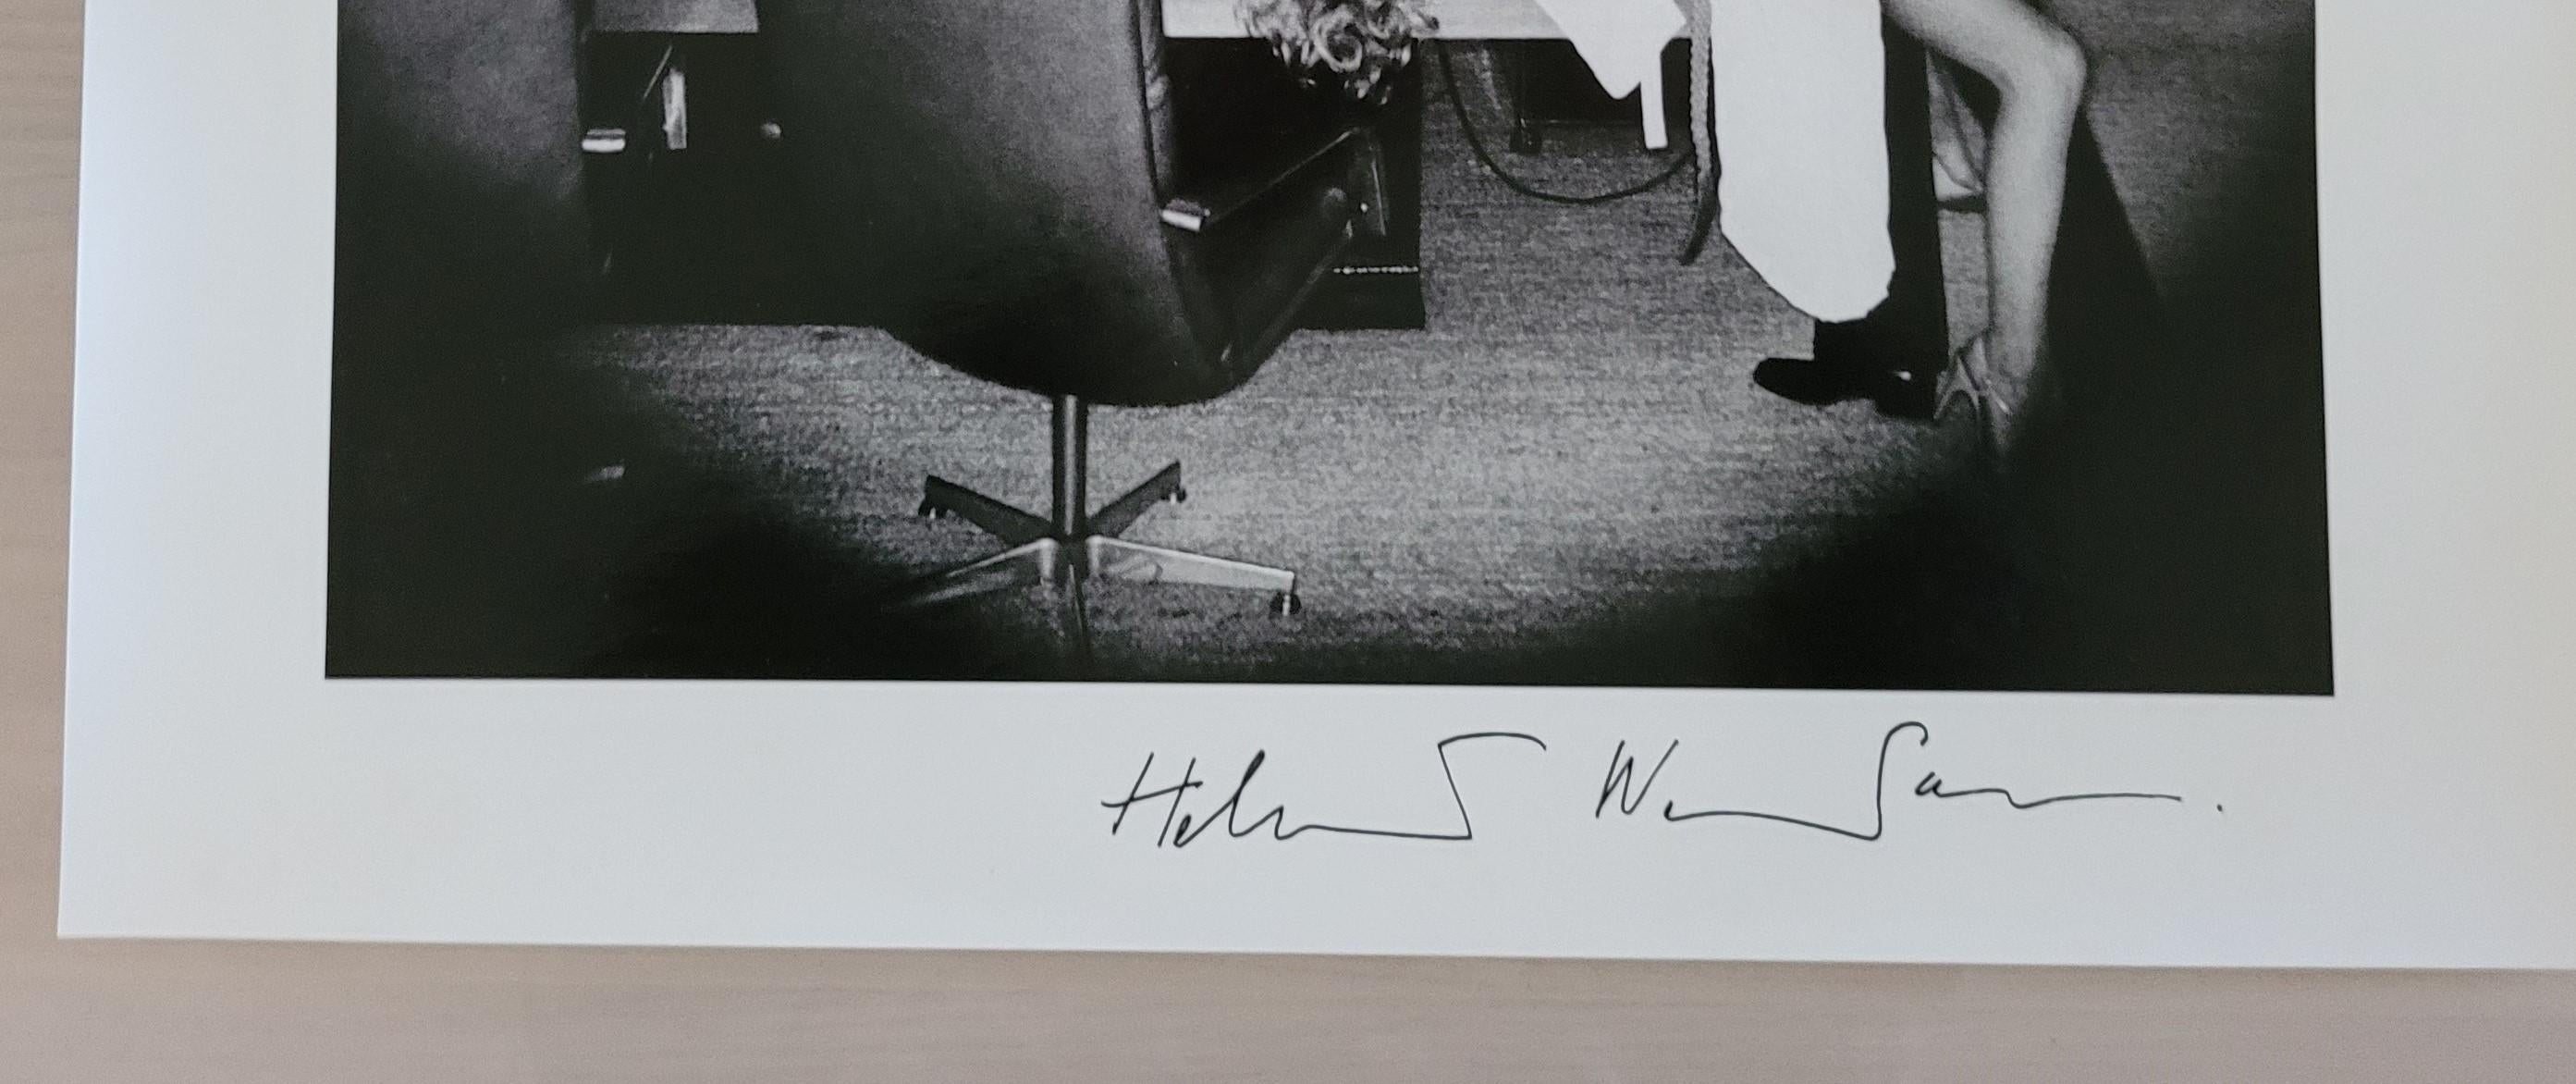 Office Love, 1976

HELMUT NEWTON (1920 -2004)
Gelatin Silver Print.
Signed on front by Helmut Newton. Back is dated “Paris 1982” and with Helmut Newton's copyright stamp.
Condition: Excellent 

A woman and a man pose in a conference or meeting room.